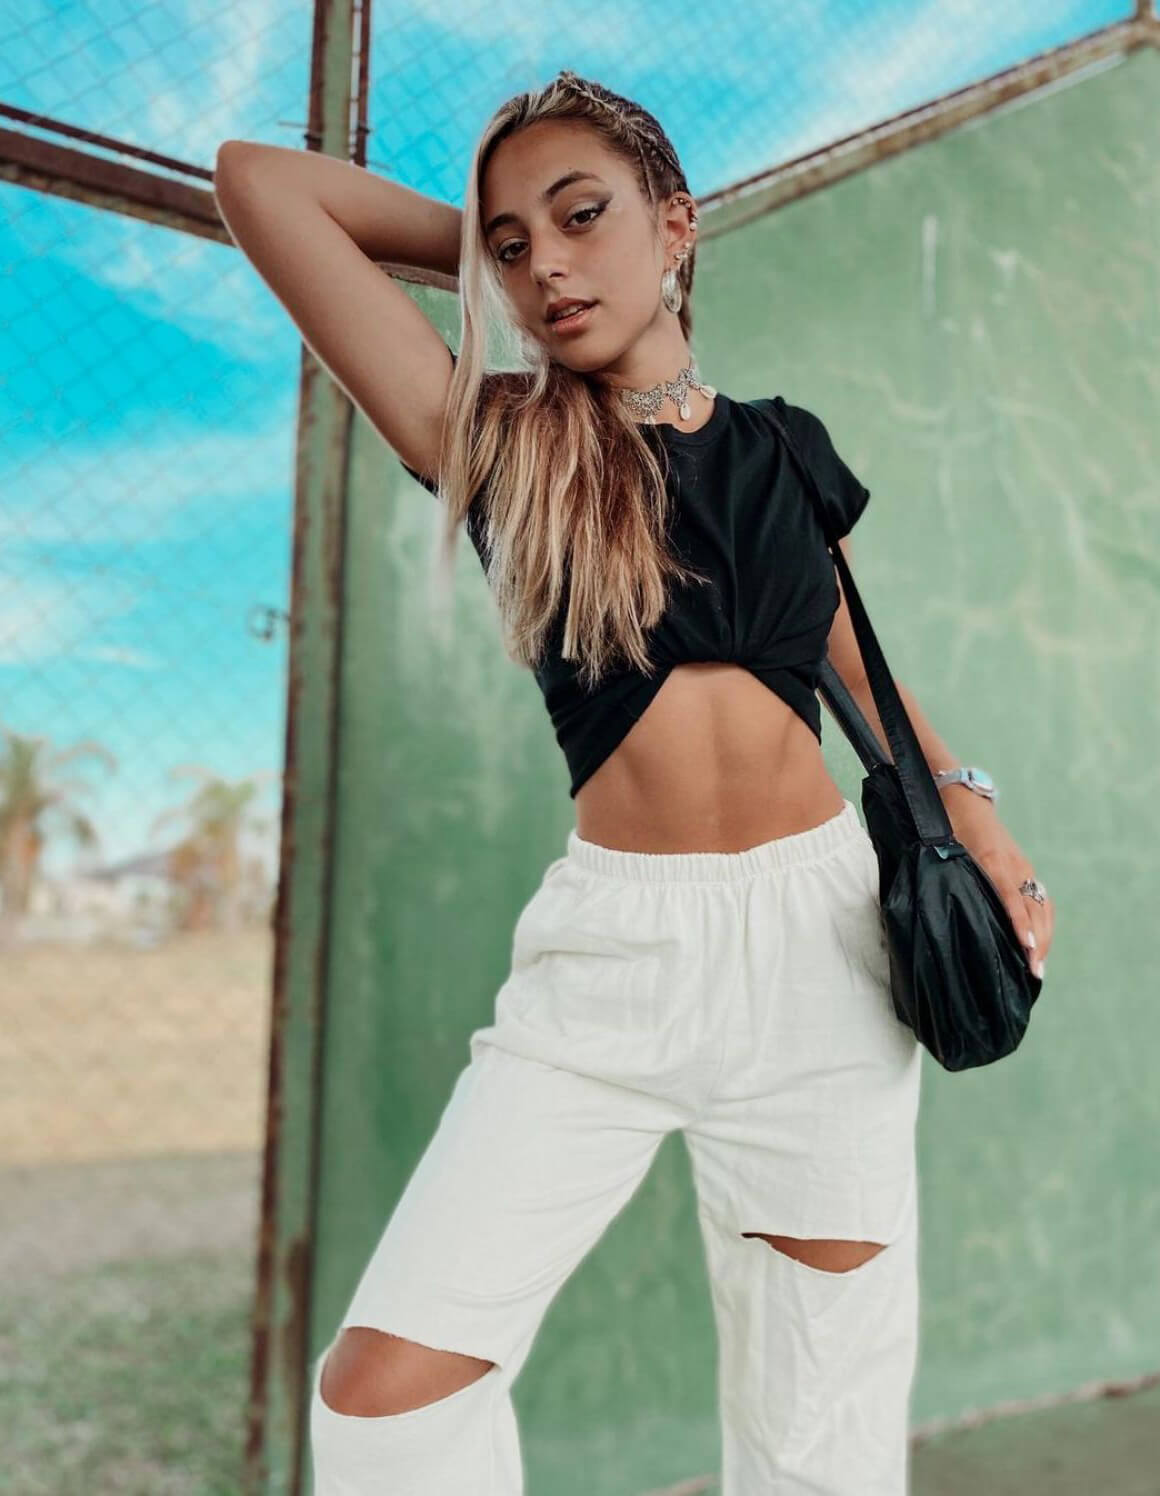 Angeles Watters in Show off her Abs in Short Top and White Pants Photos 12/03/2020